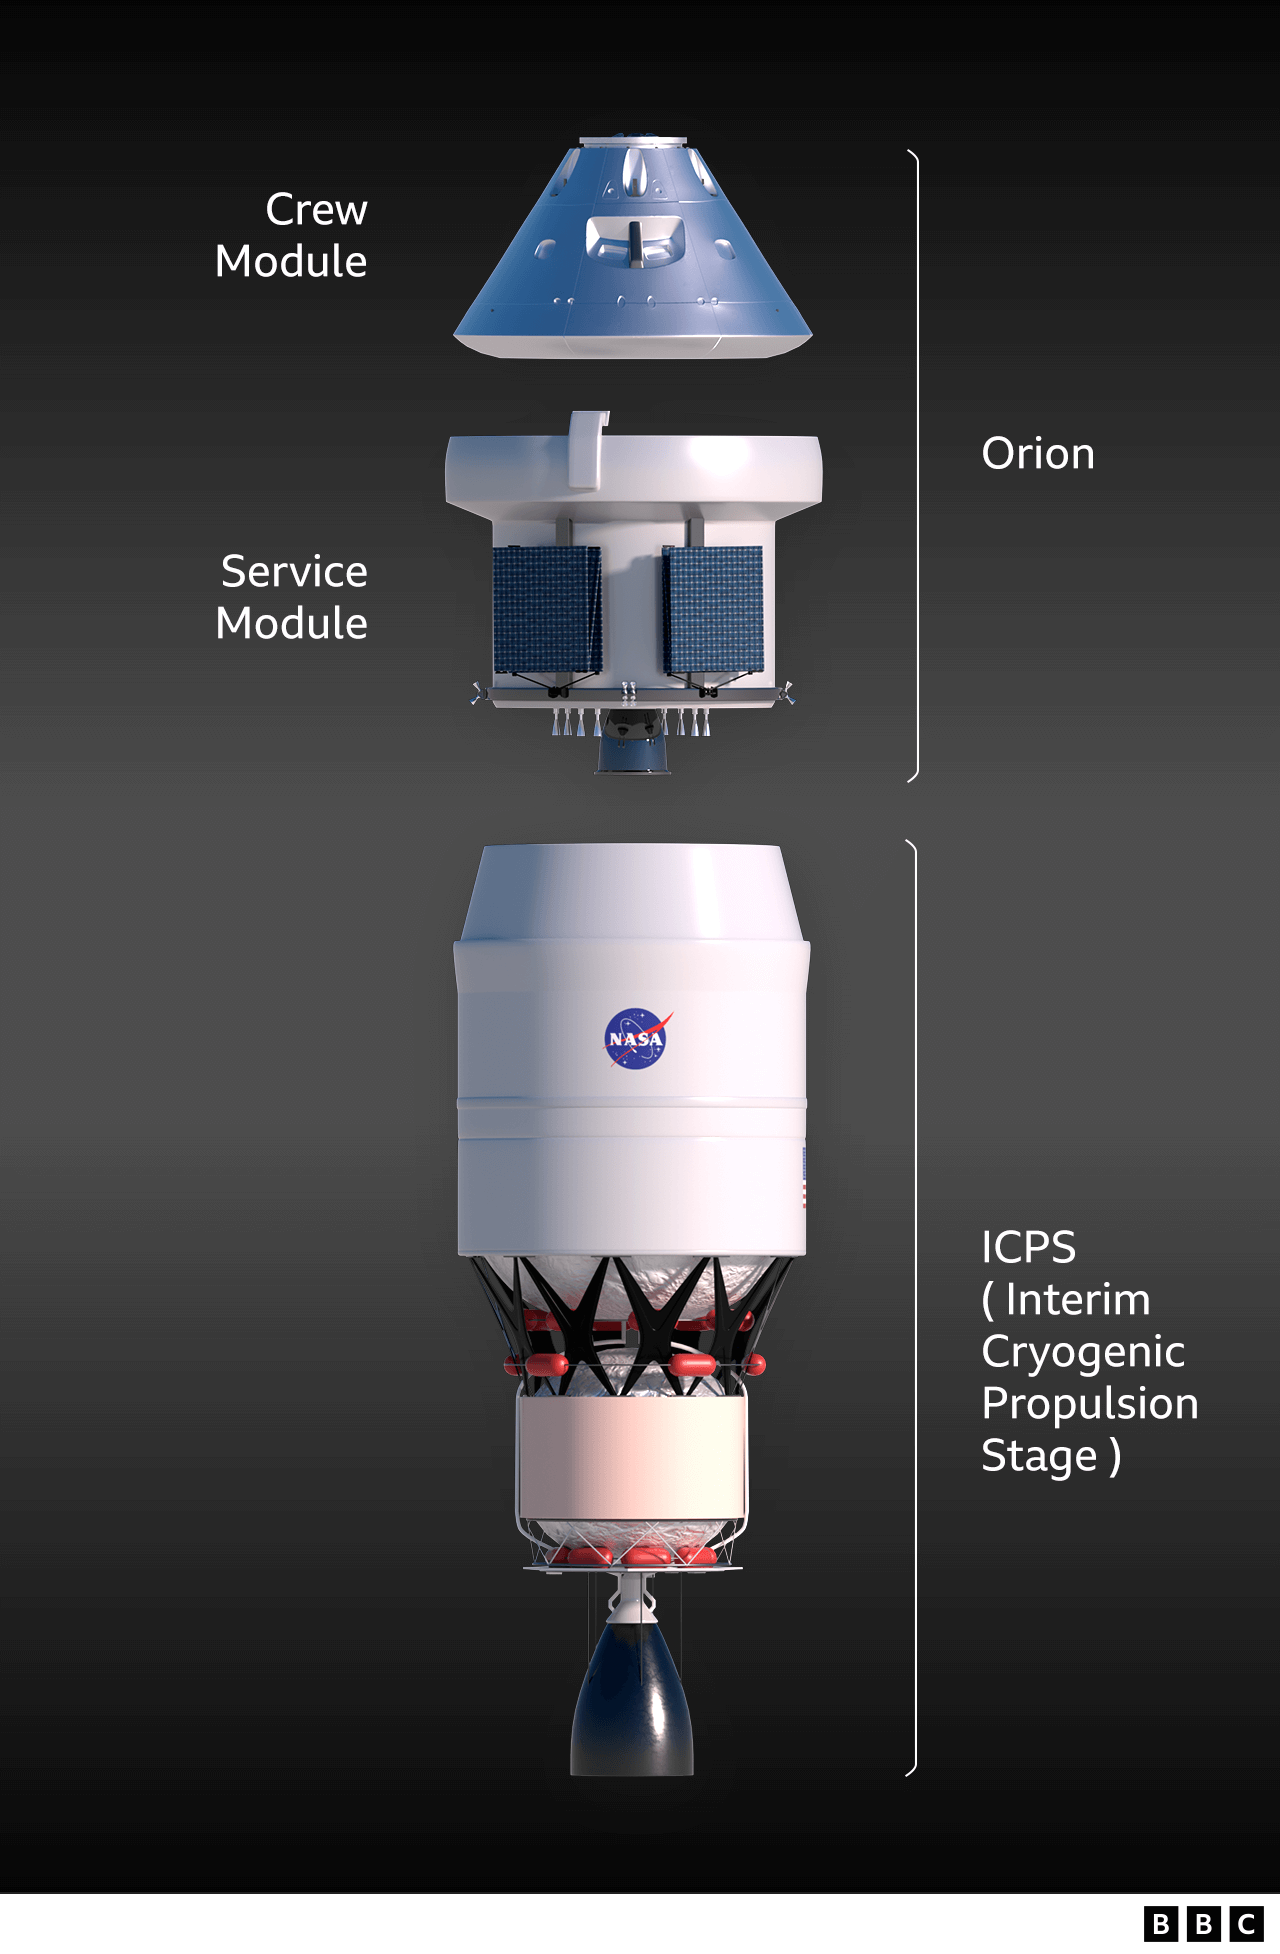 Graphic Orion